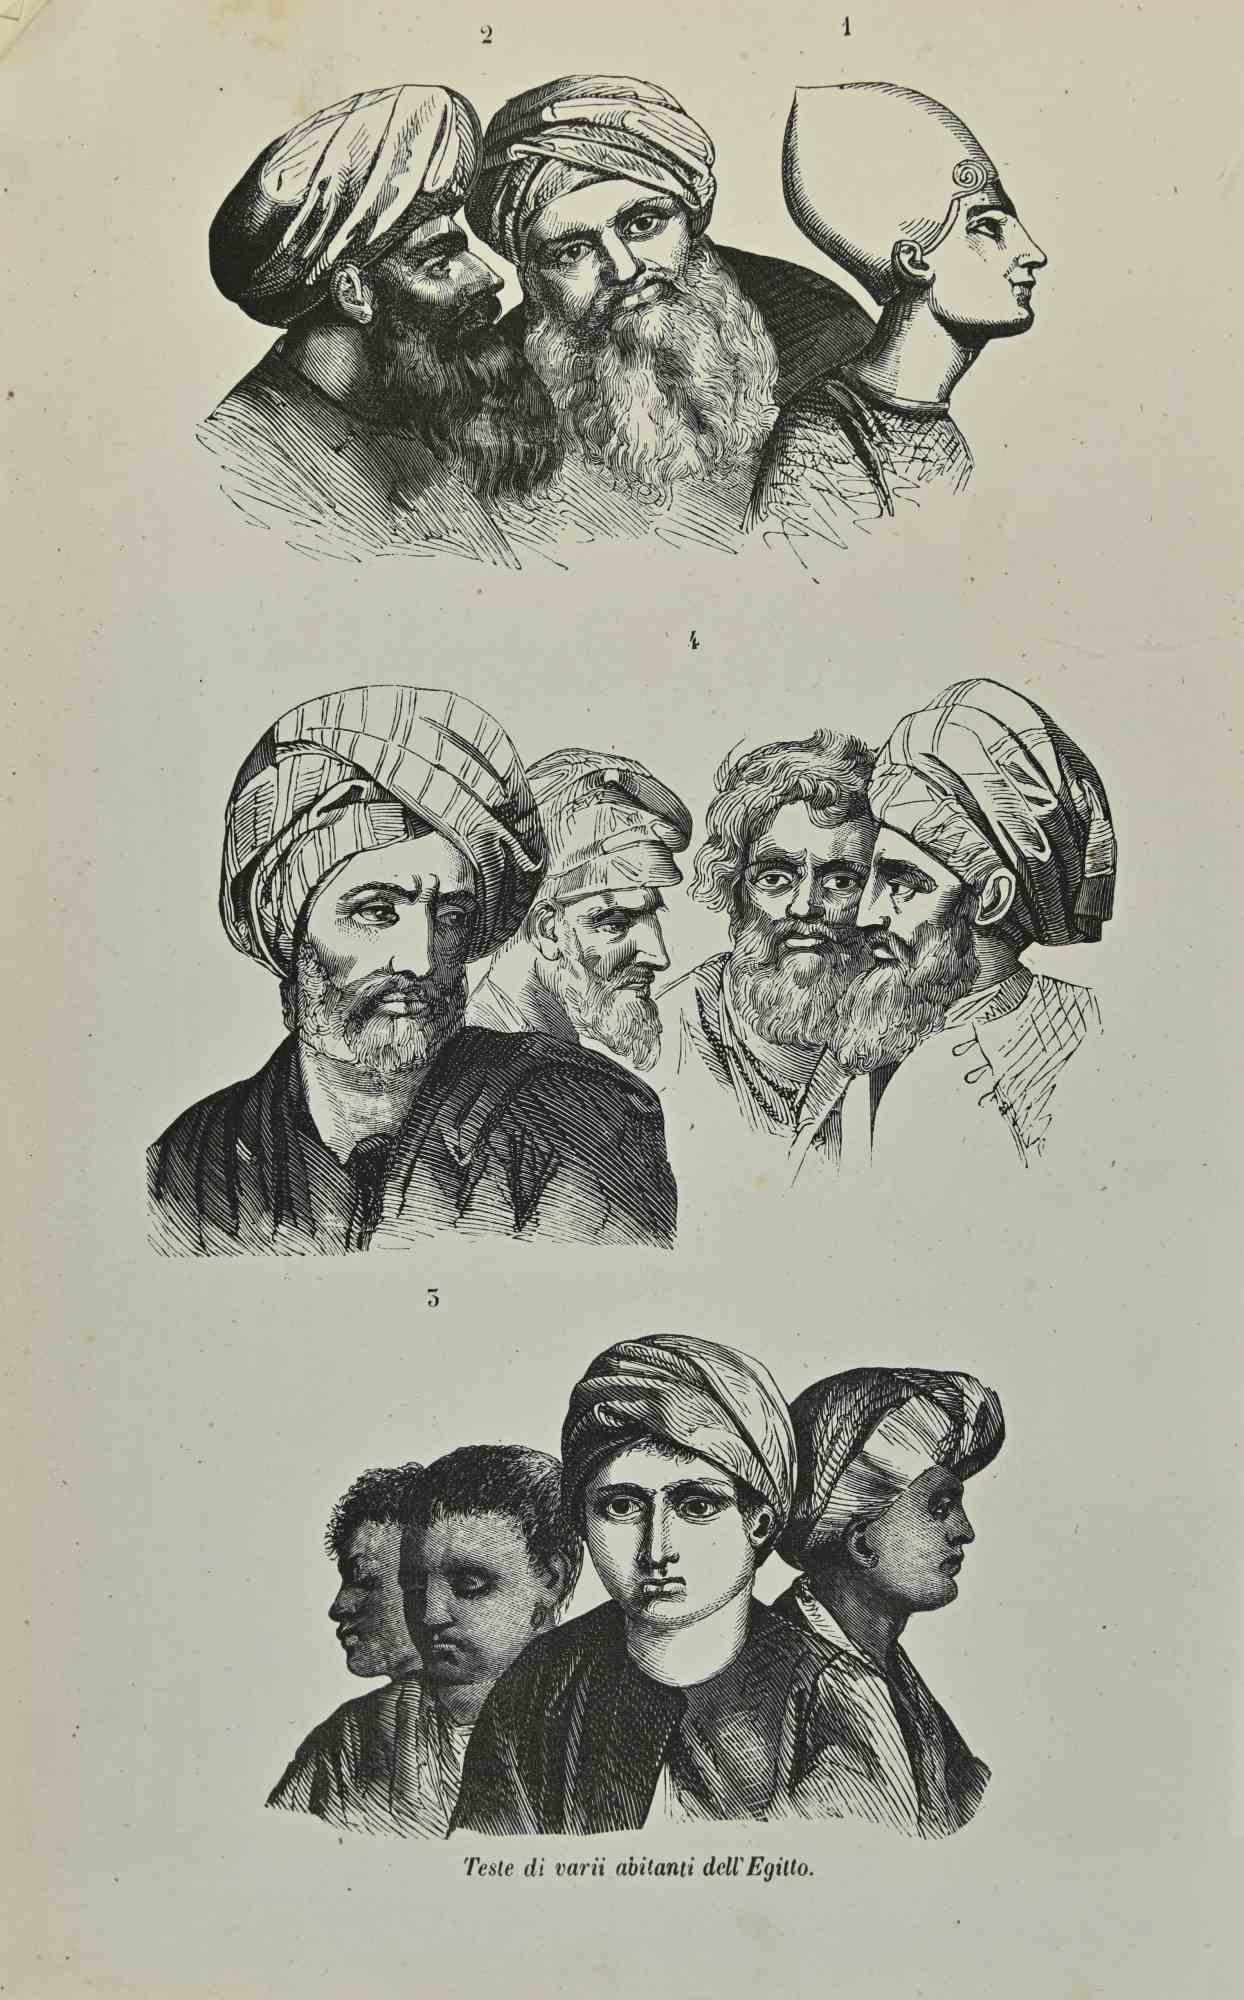 Uses and Customs - Egyptian - Lithograph - 1862